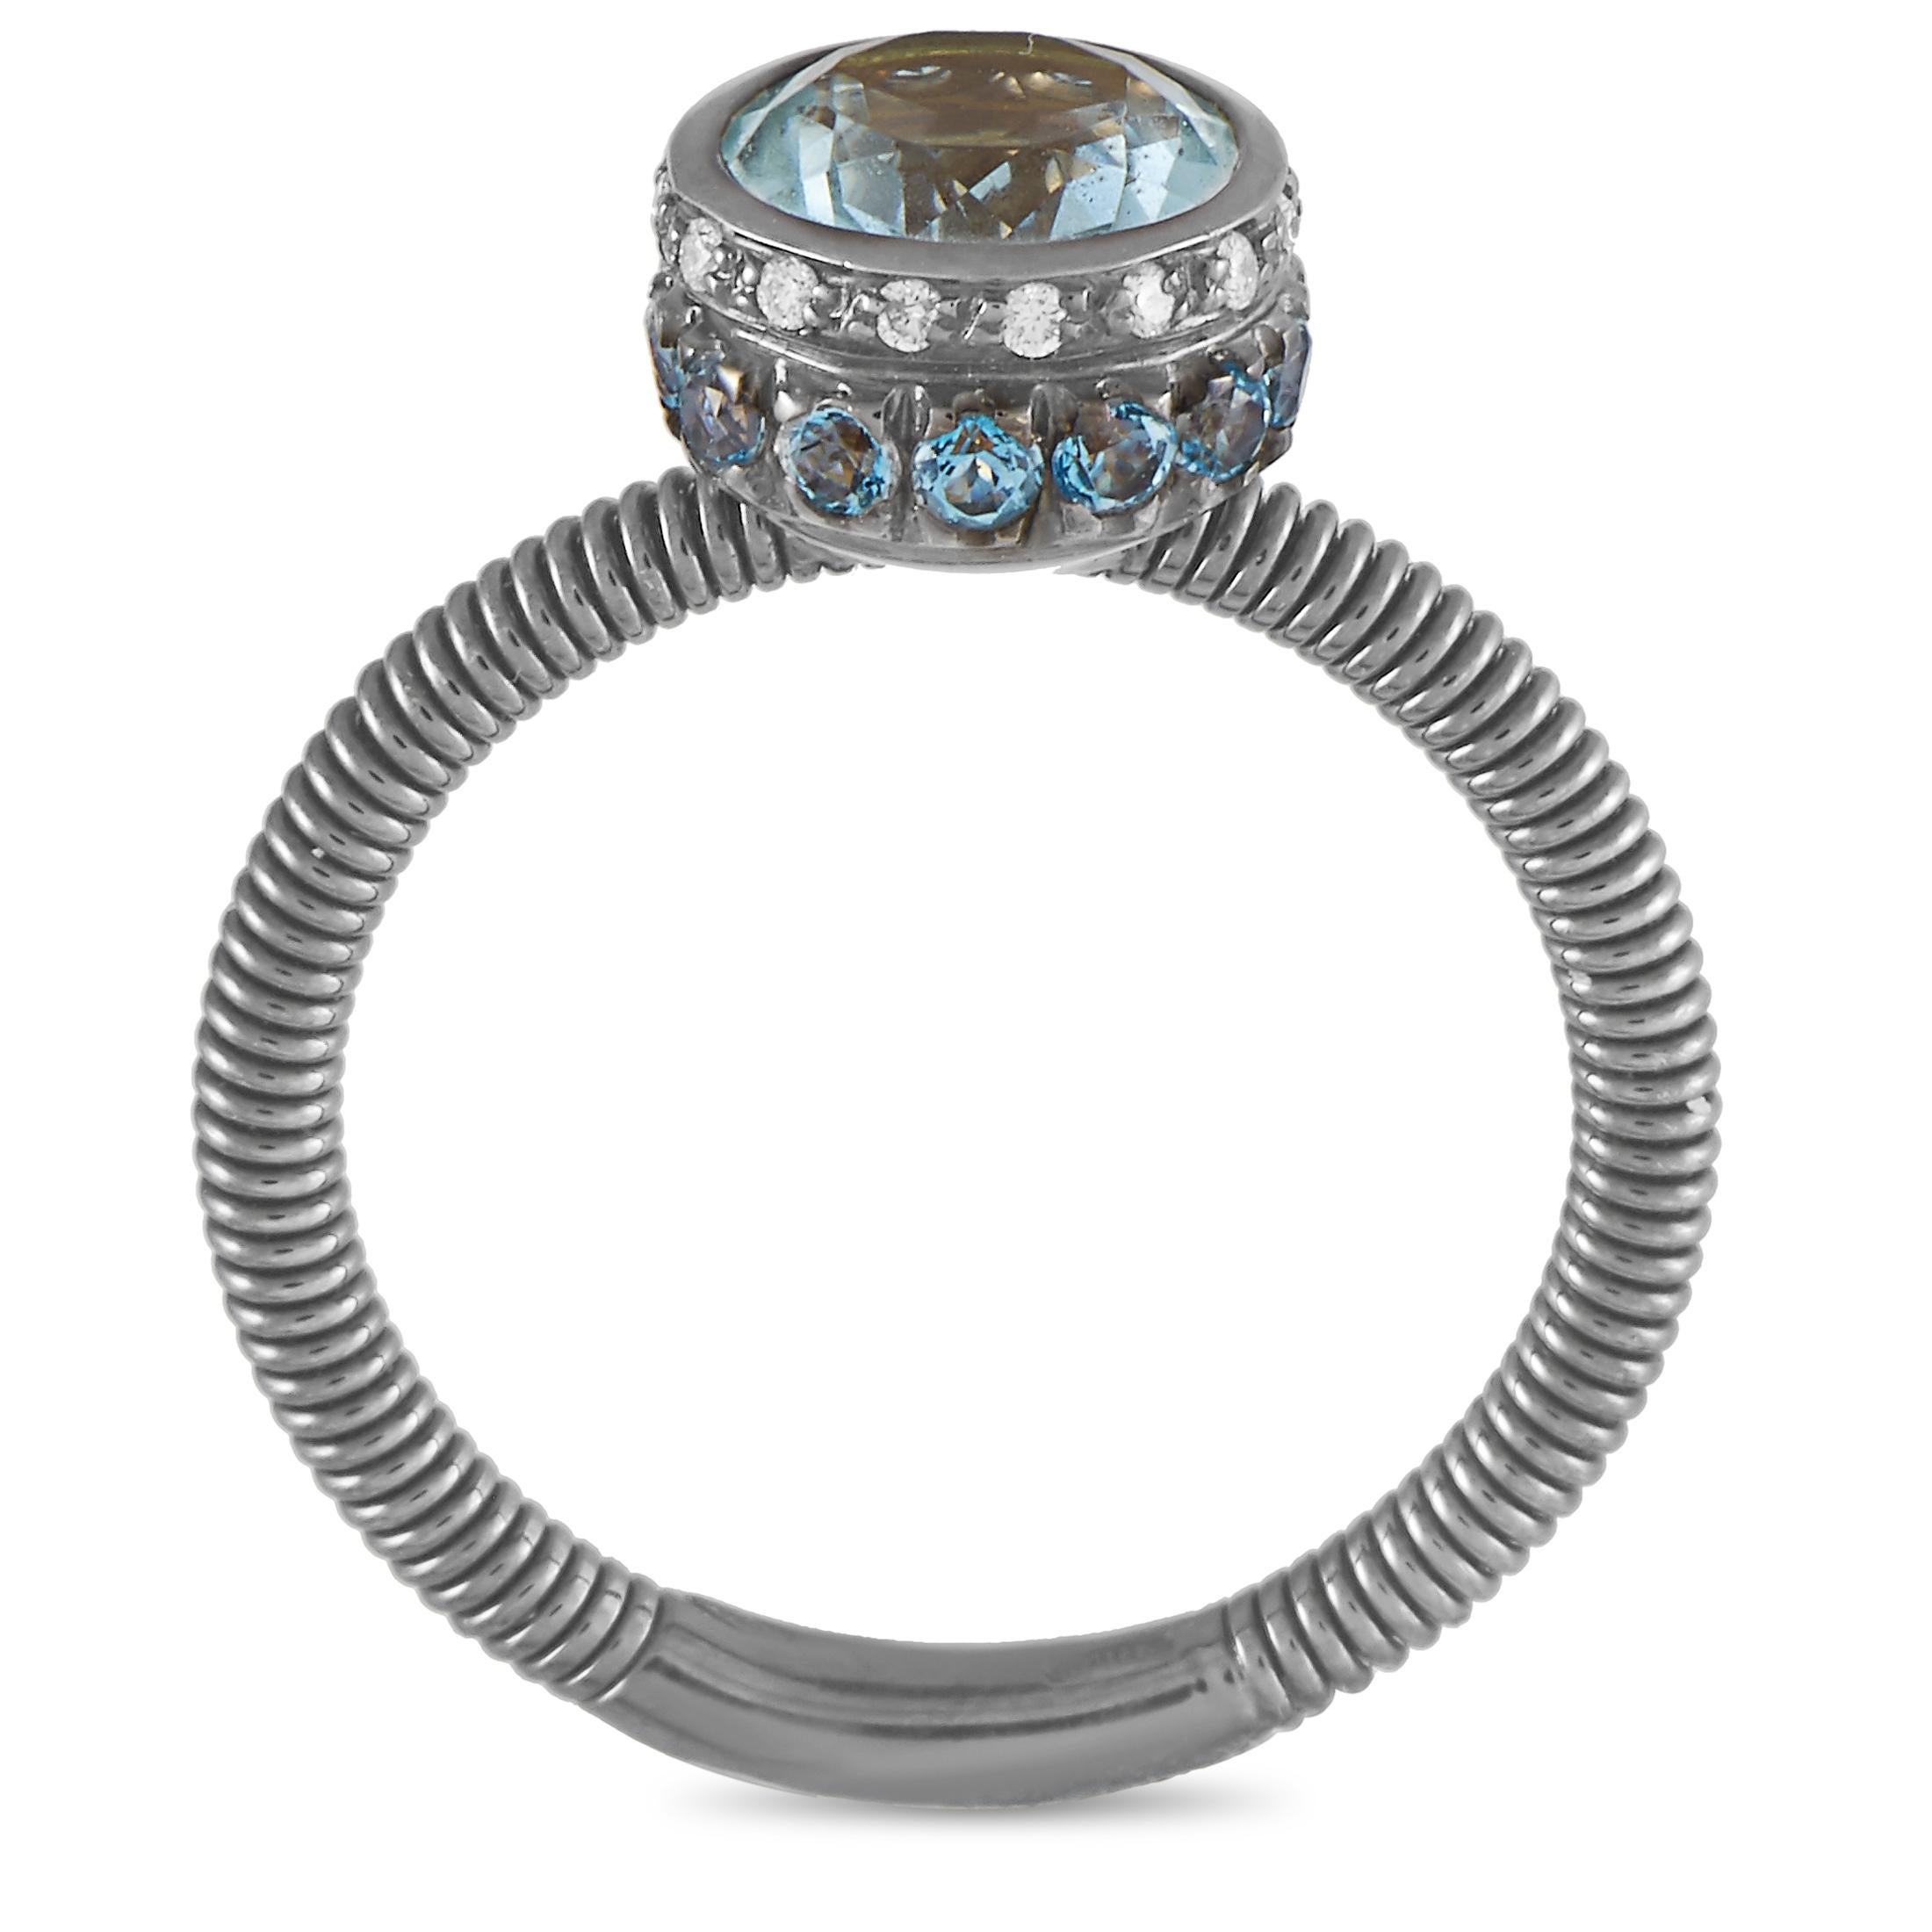 This Oro Trend ring is made of 18K white gold and weighs 4.2 grams, boasting band thickness of 2 mm and top height of 7 mm, while top dimensions measure 9 by 9 mm. The ring is embellished with aquamarine and topaz stones and a total of 0.10 carats